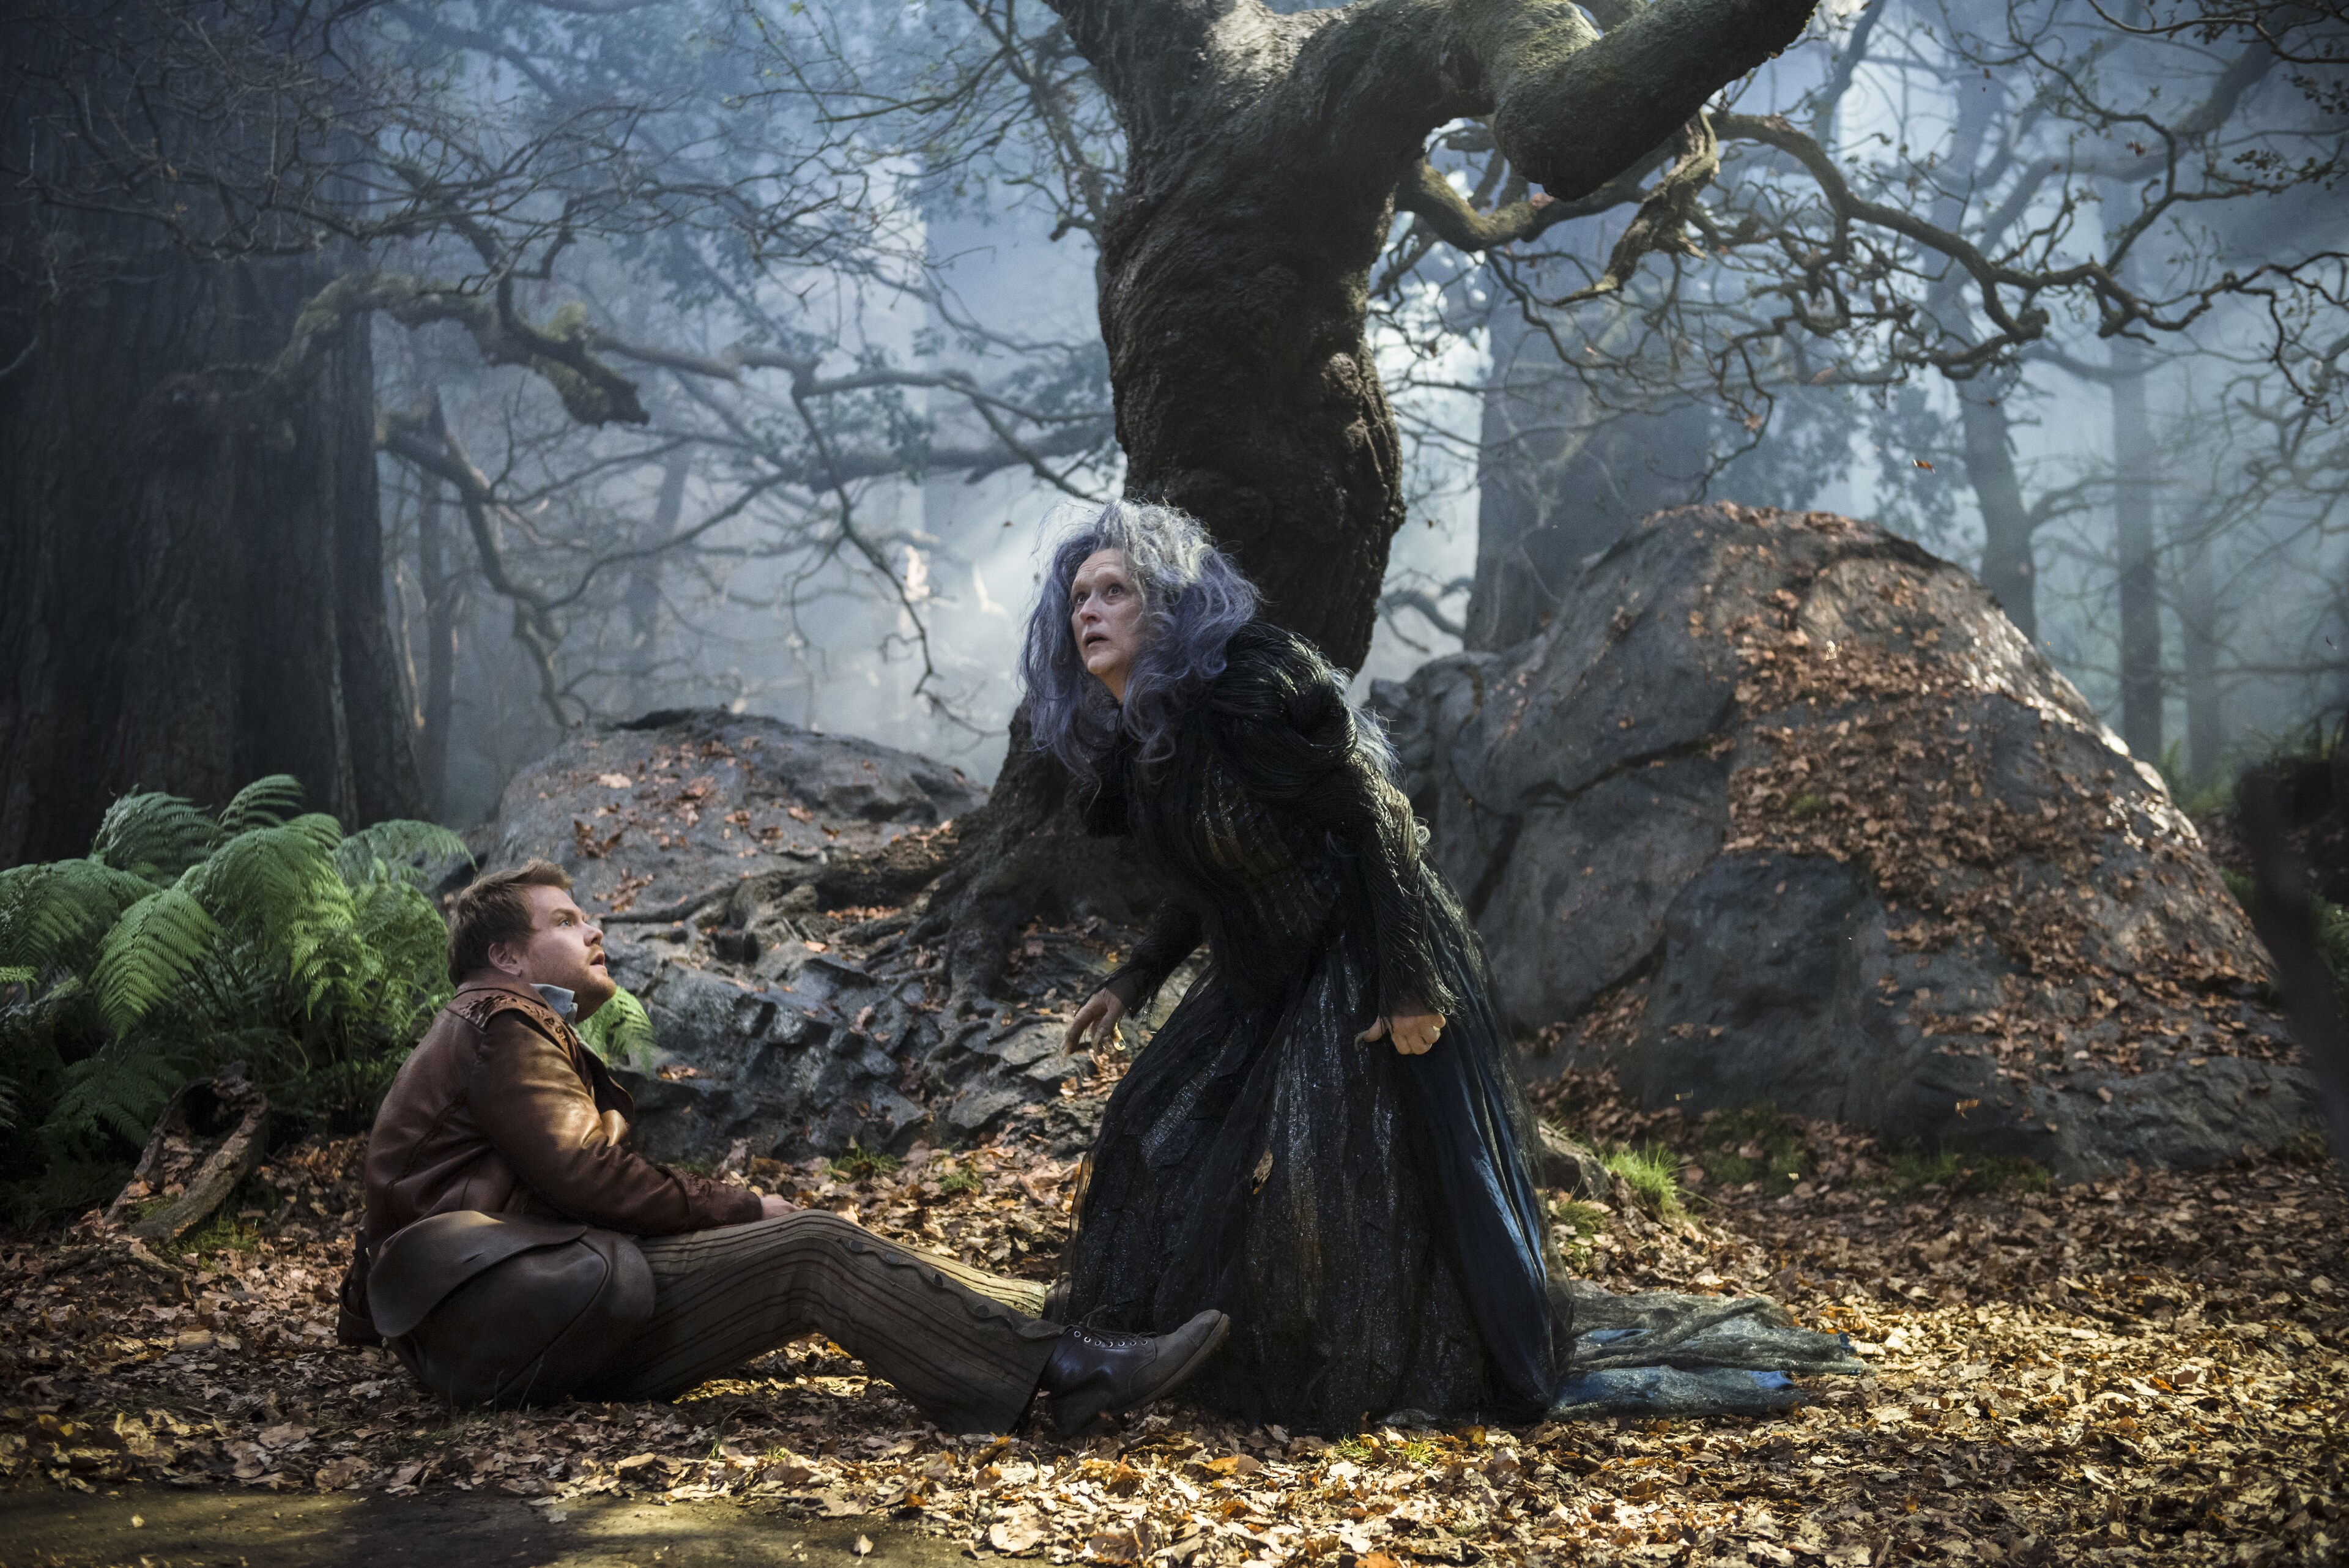 James Corden and Meryl Streep star in “Into the Woods"